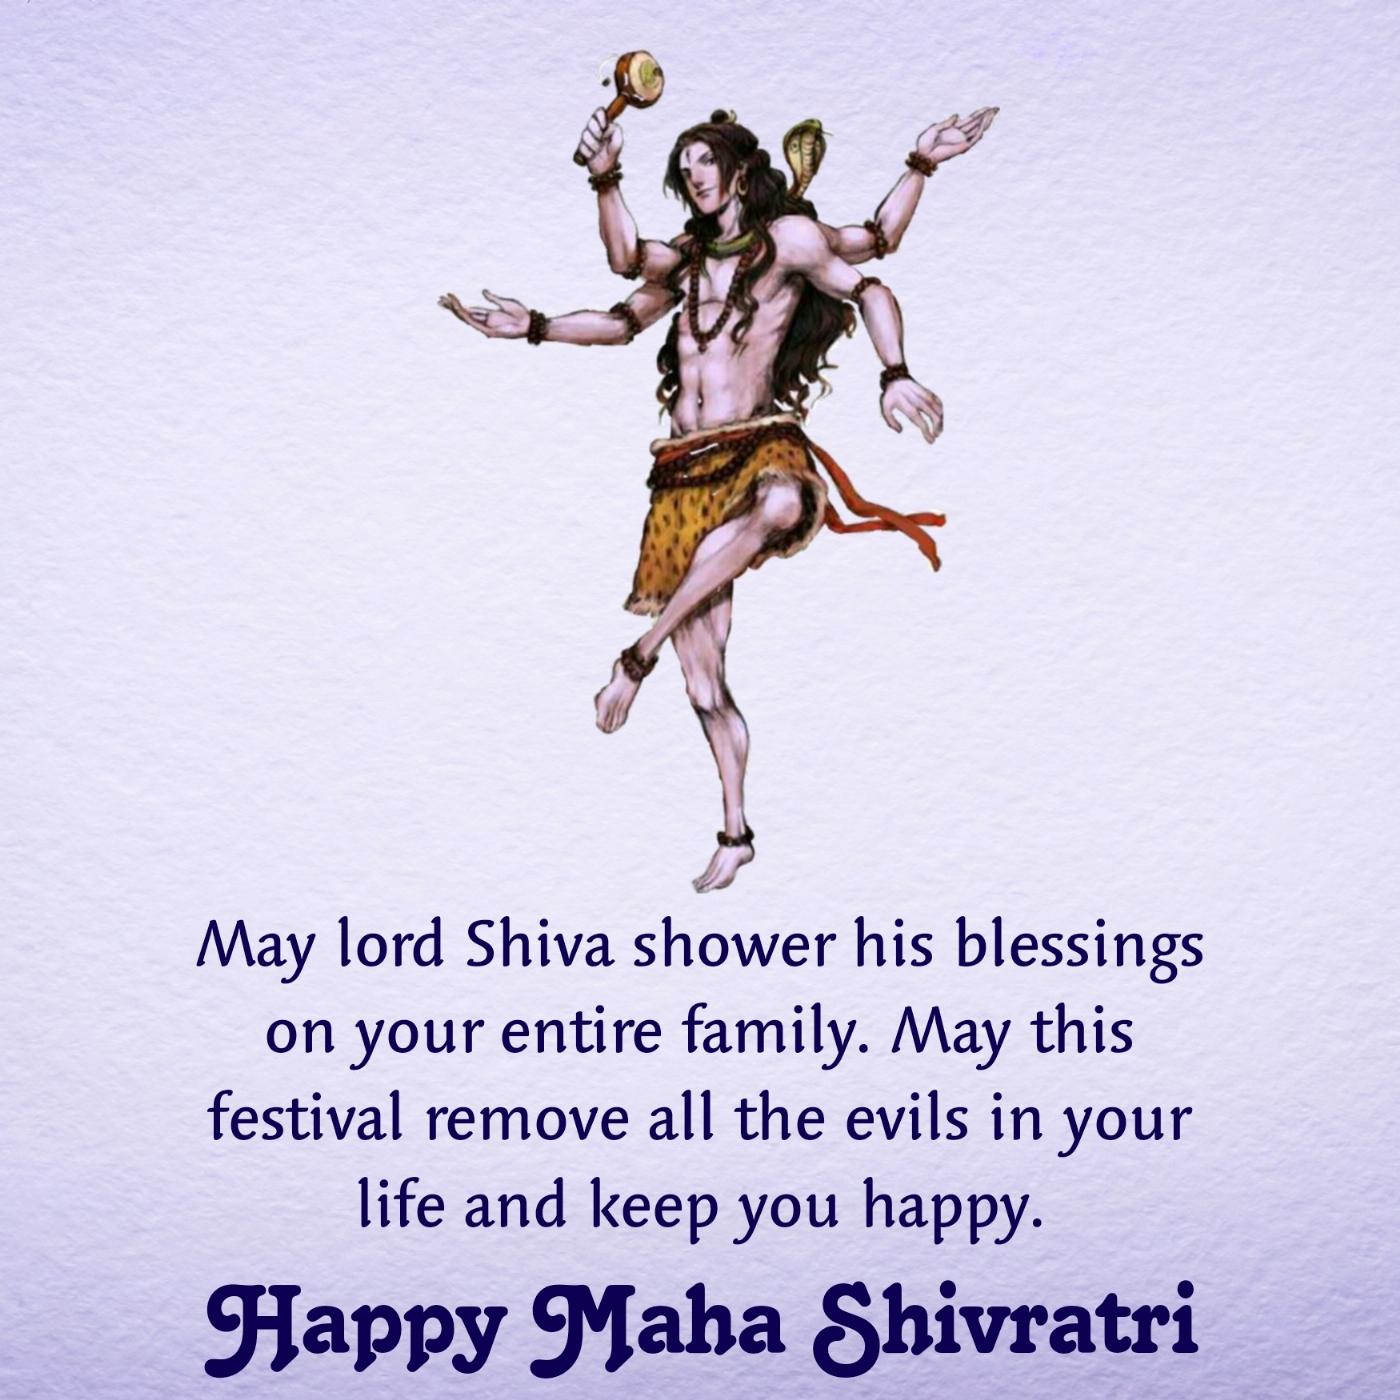 May lord Shiva shower his blessings on your entire family